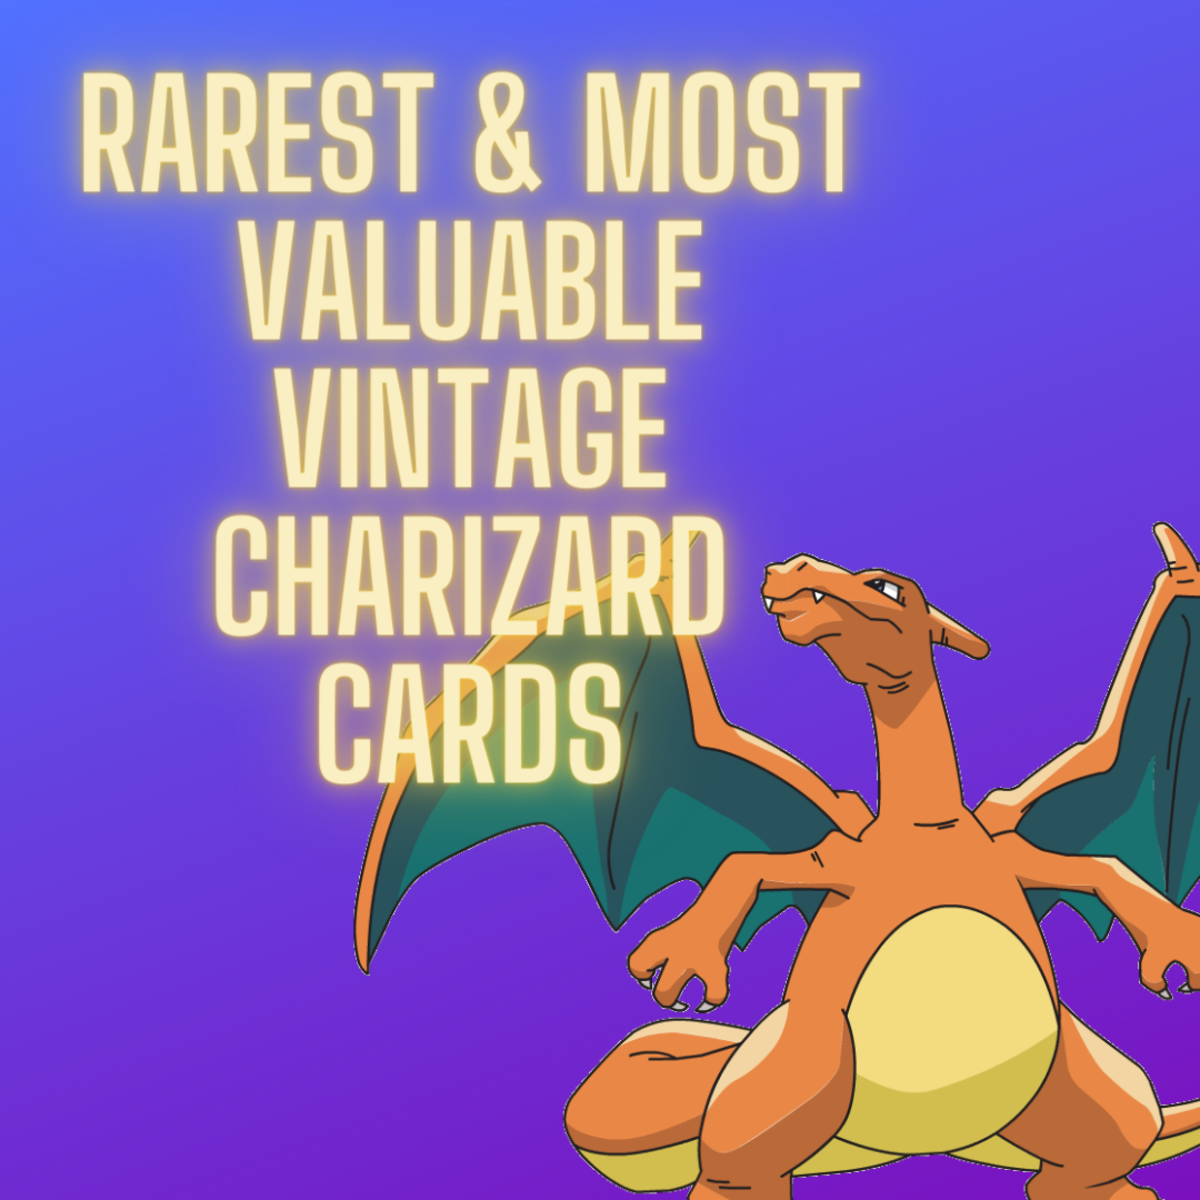 Often thought of as being among the most premium Pokémon cards on the vintage market, cards featuring Charizard are very sought after by Pokémon enthusiasts looking to add exclusive items to their collections.